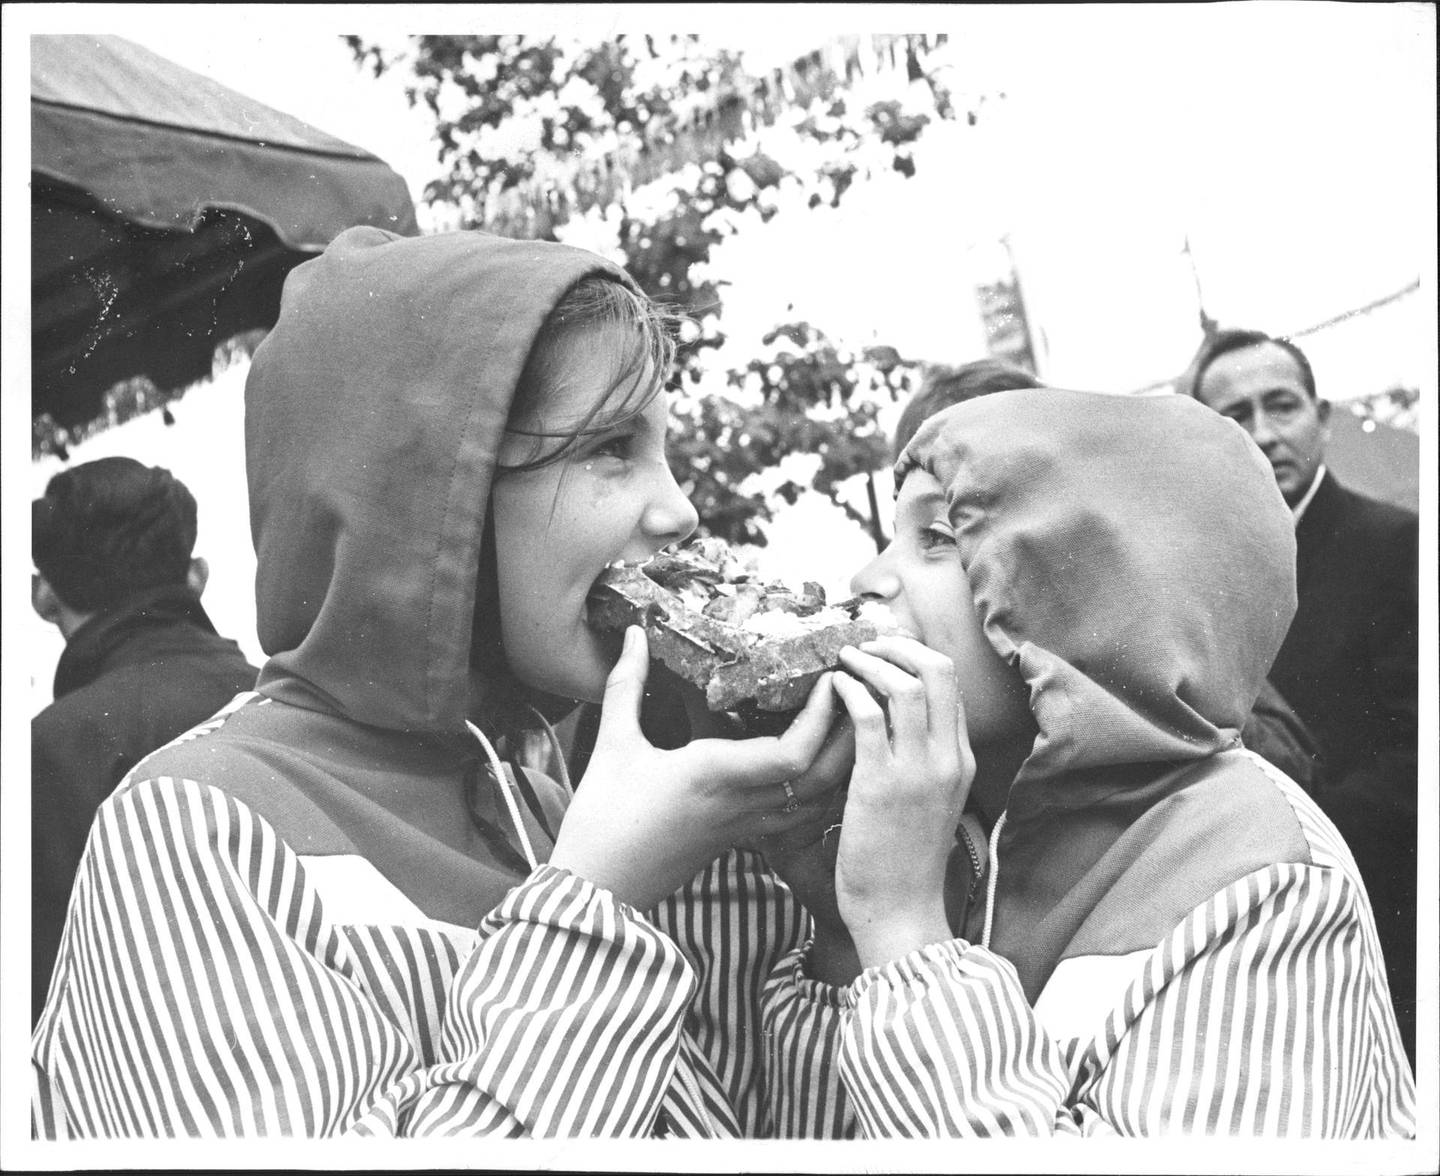 Twelve-year-old Debbie Moffett, left, and for sister Barbara, 10, of New Jersey share a Belgian waffle. October 15, 1965. (Photo by Jerry Engel/New York Post Archives /(c) NYP Holdings, Inc. via Getty Images)